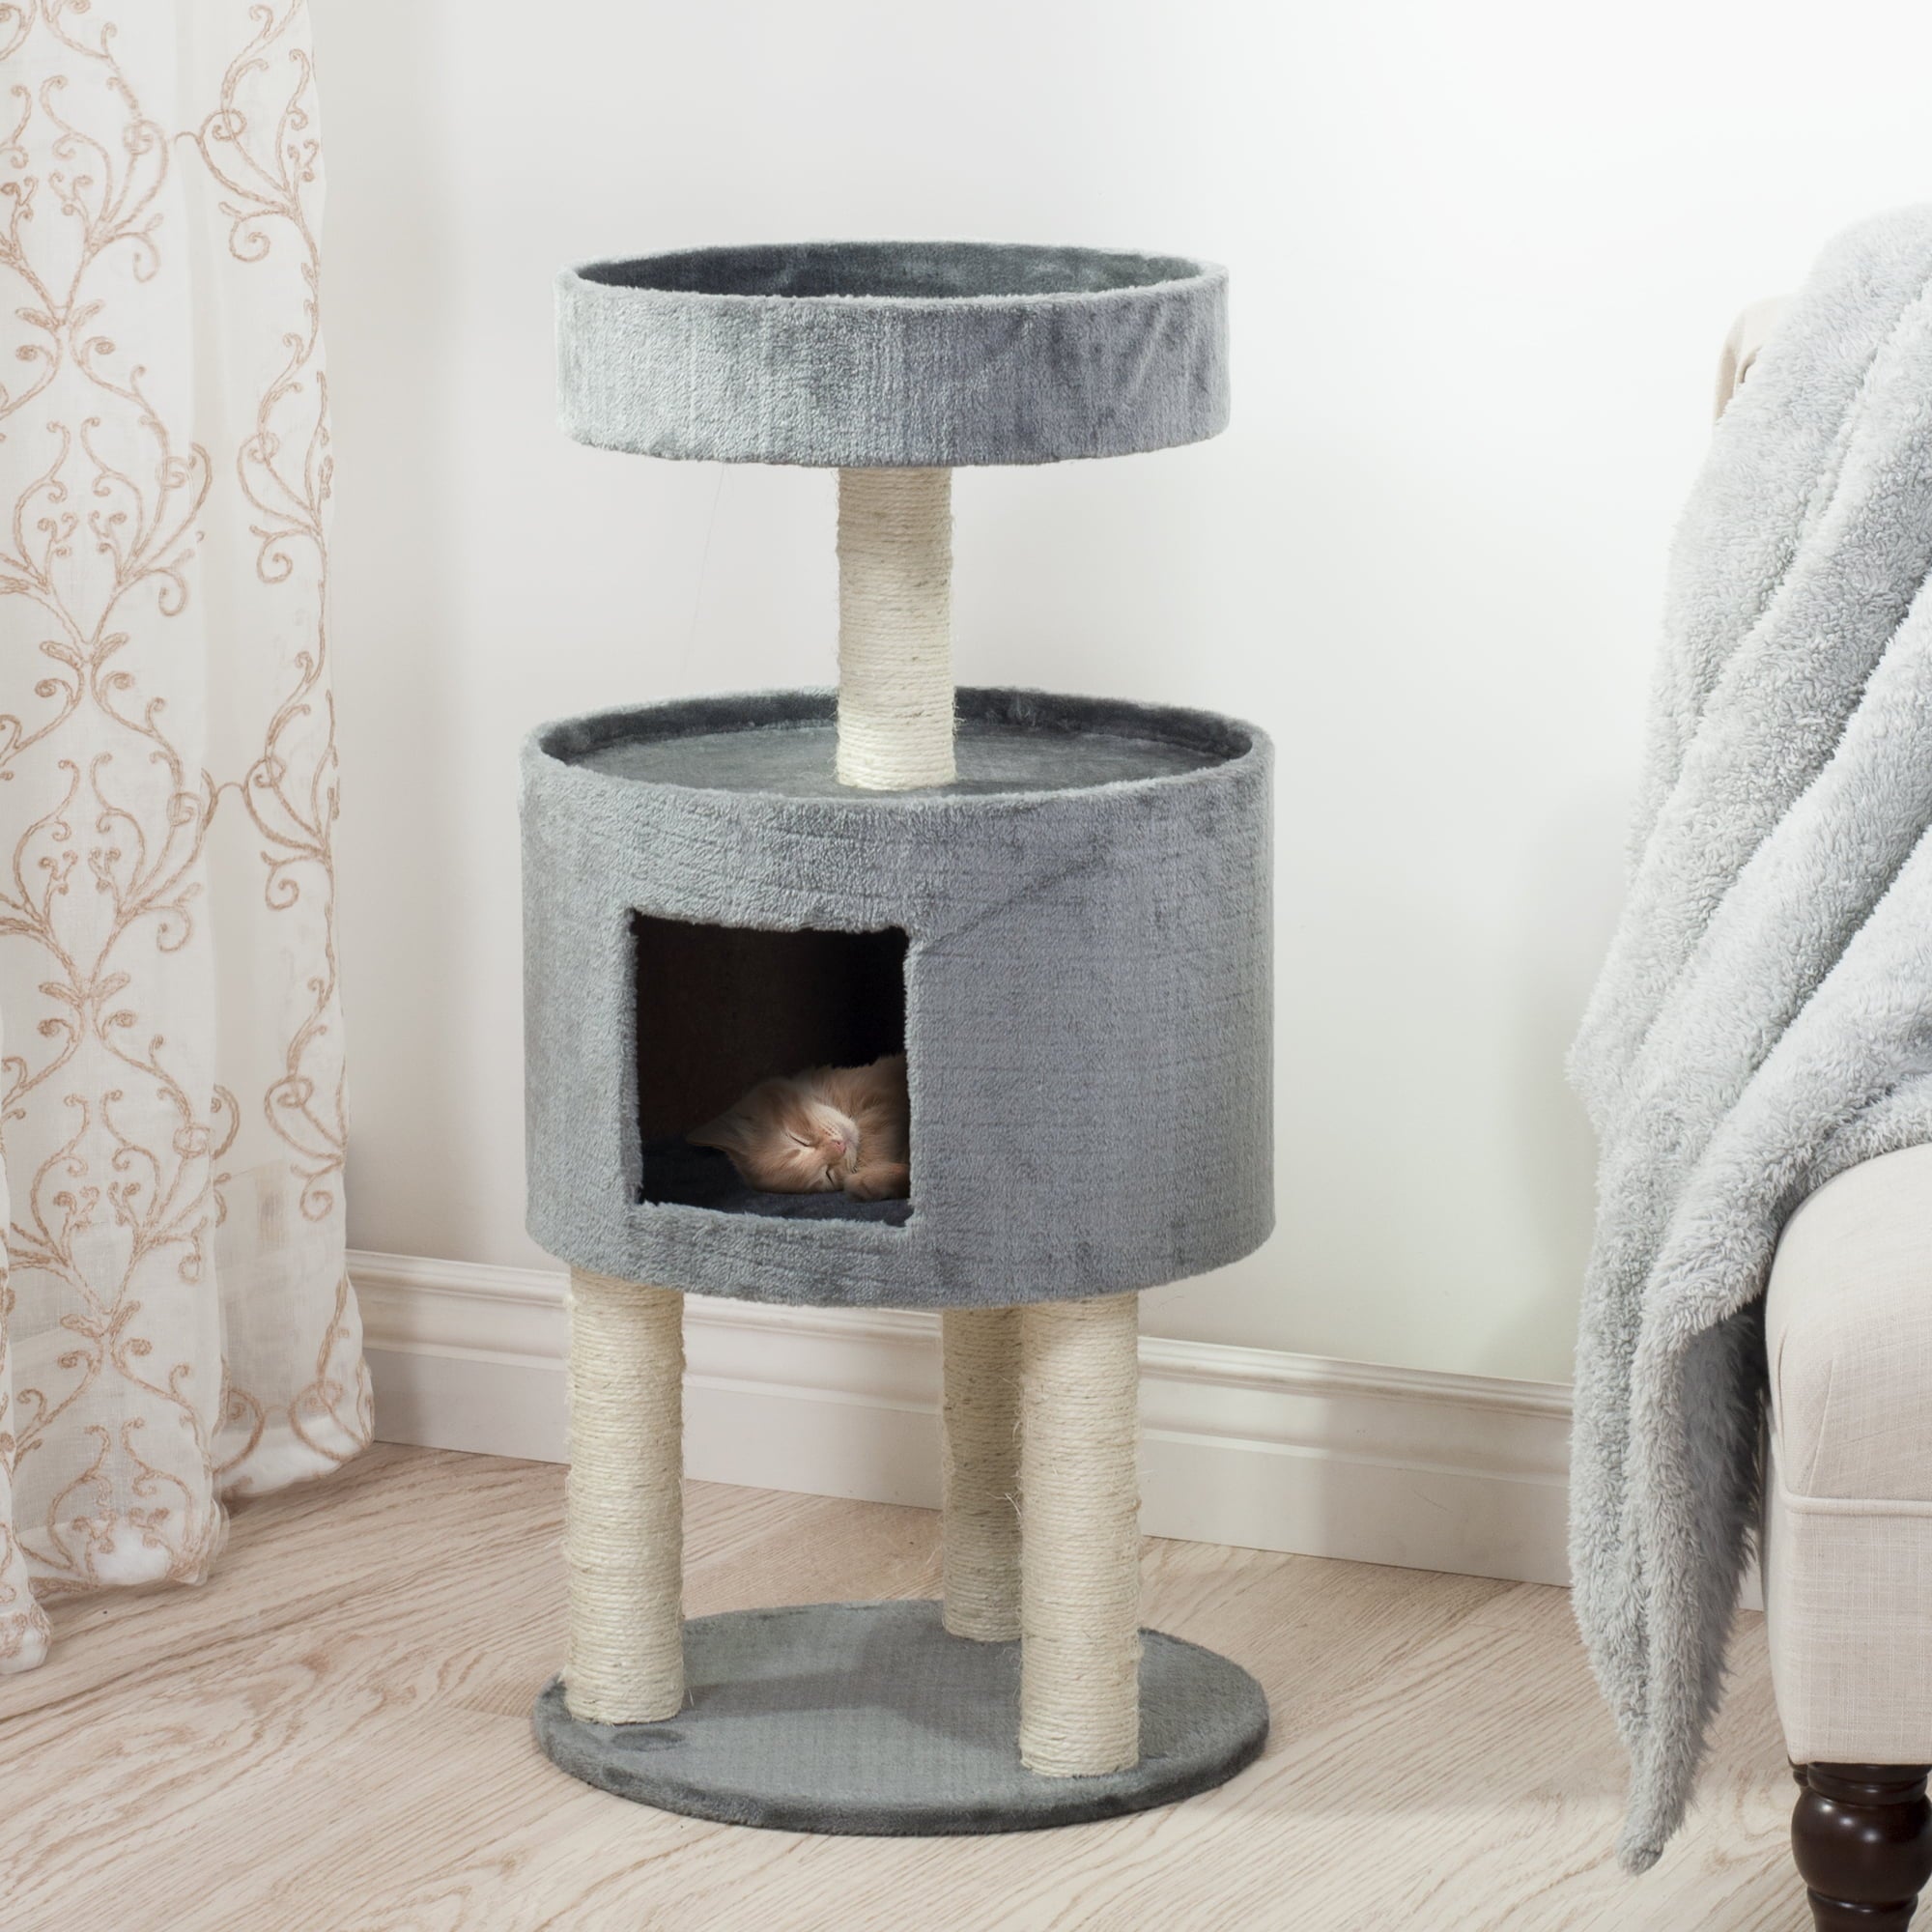 4-Tier Round Cat Tower - Large Cat Condo， Napping Perch， and 4 Sisal Rope Scratching Posts - Cat Tree for Indoor Cats by PETMAKER (Gray)